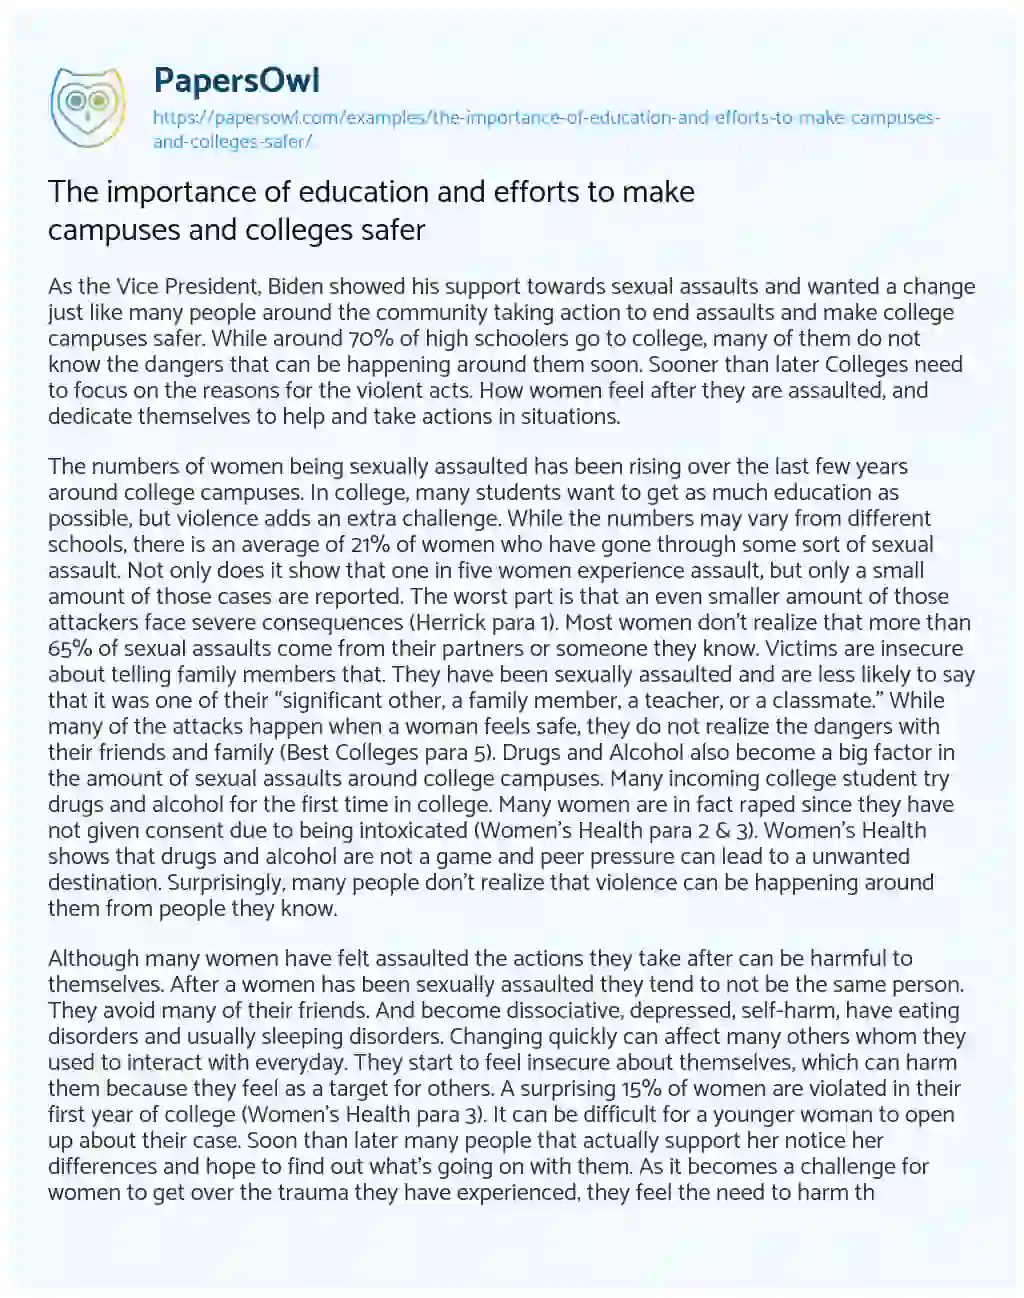 Essay on The Importance of Education and Efforts to Make Campuses and Colleges Safer